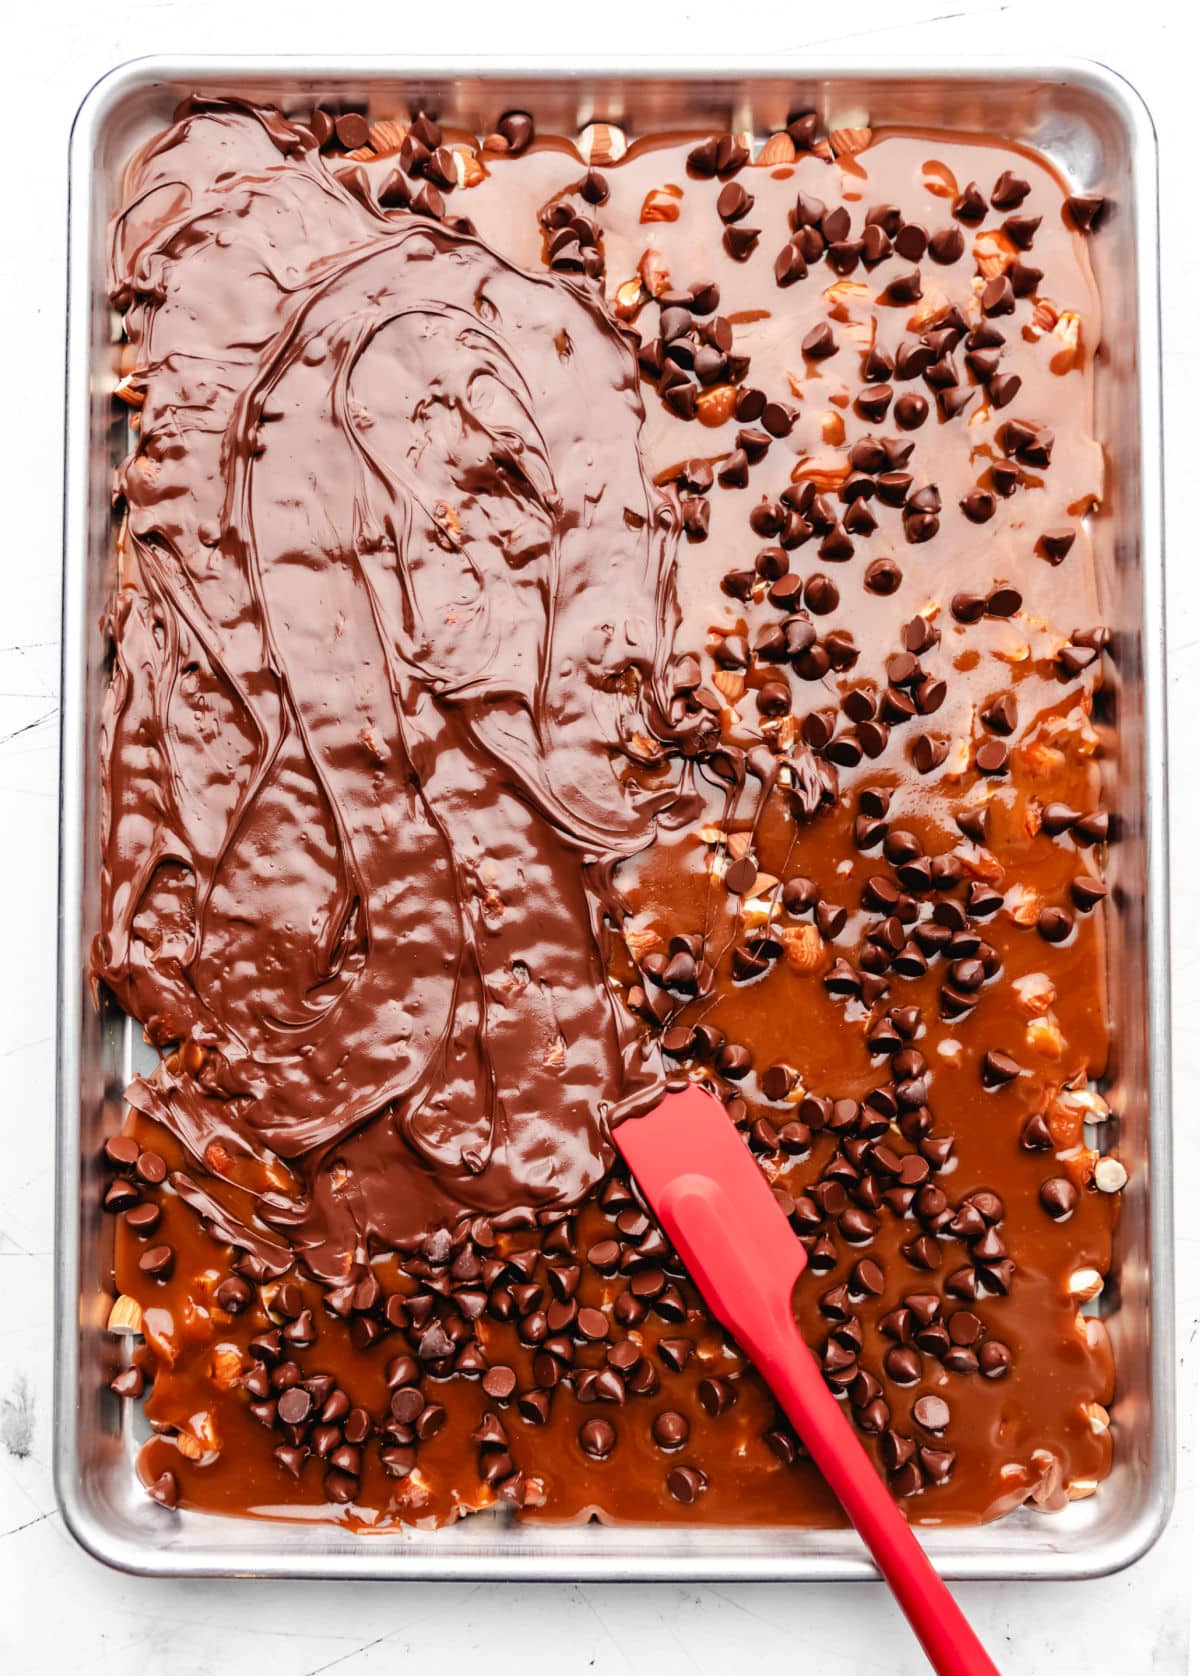 A red silicone spatula spreading melted chocolate chips over toffee.